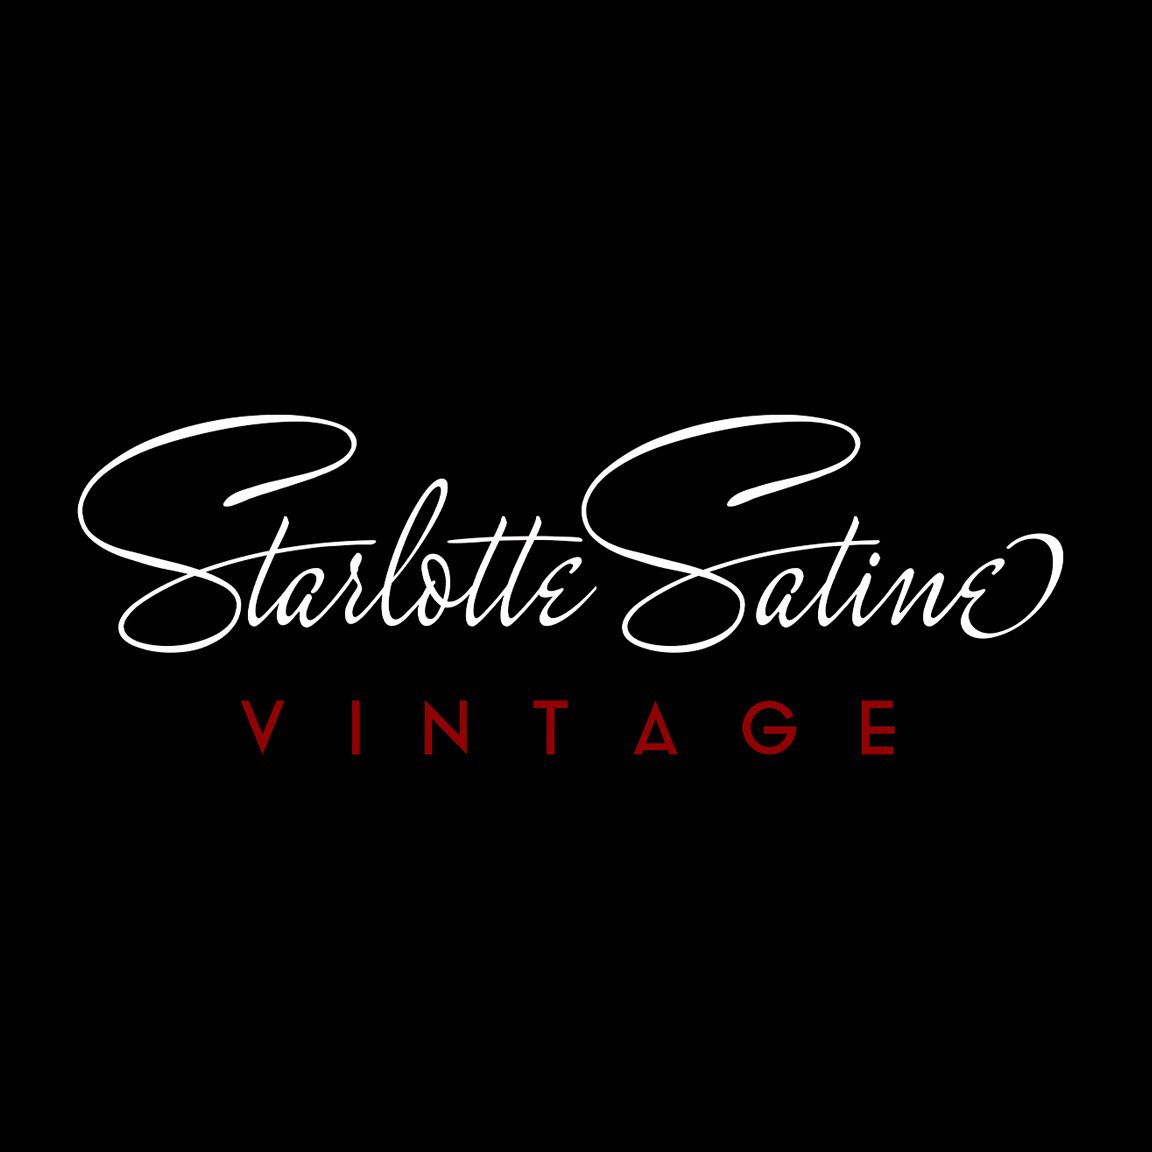 YOUR WARDROBE IS ABOUT TO GET AN UPGRADE WITH STARLOTTE SATINE VINTAGE